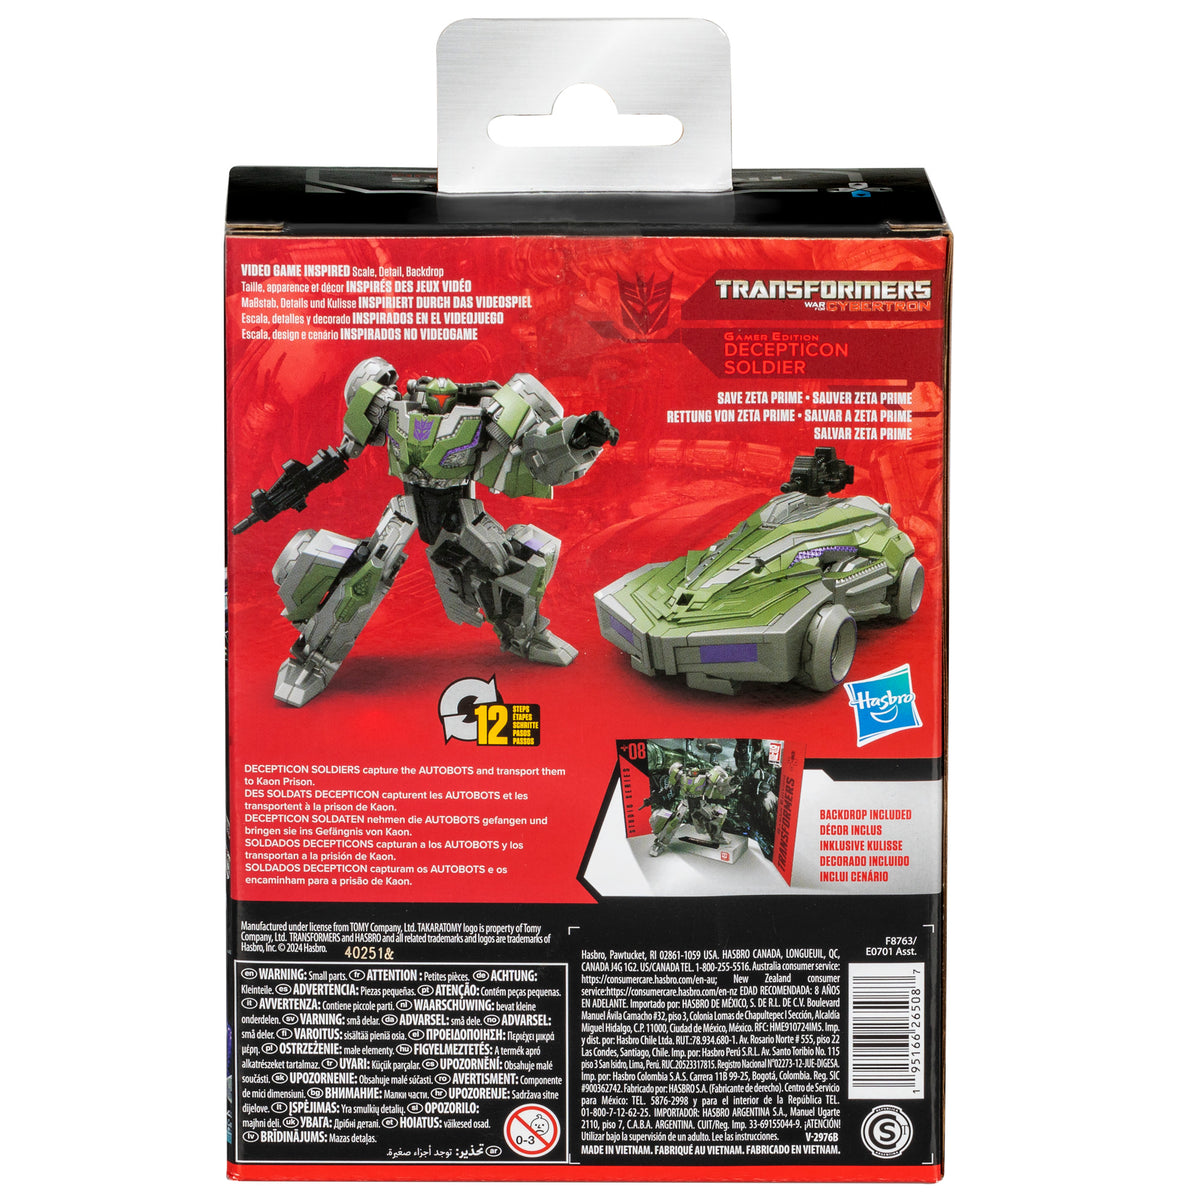 Decepticon Soldier Deluxe Class 11,5cm War For Cybertron Gamer Edition